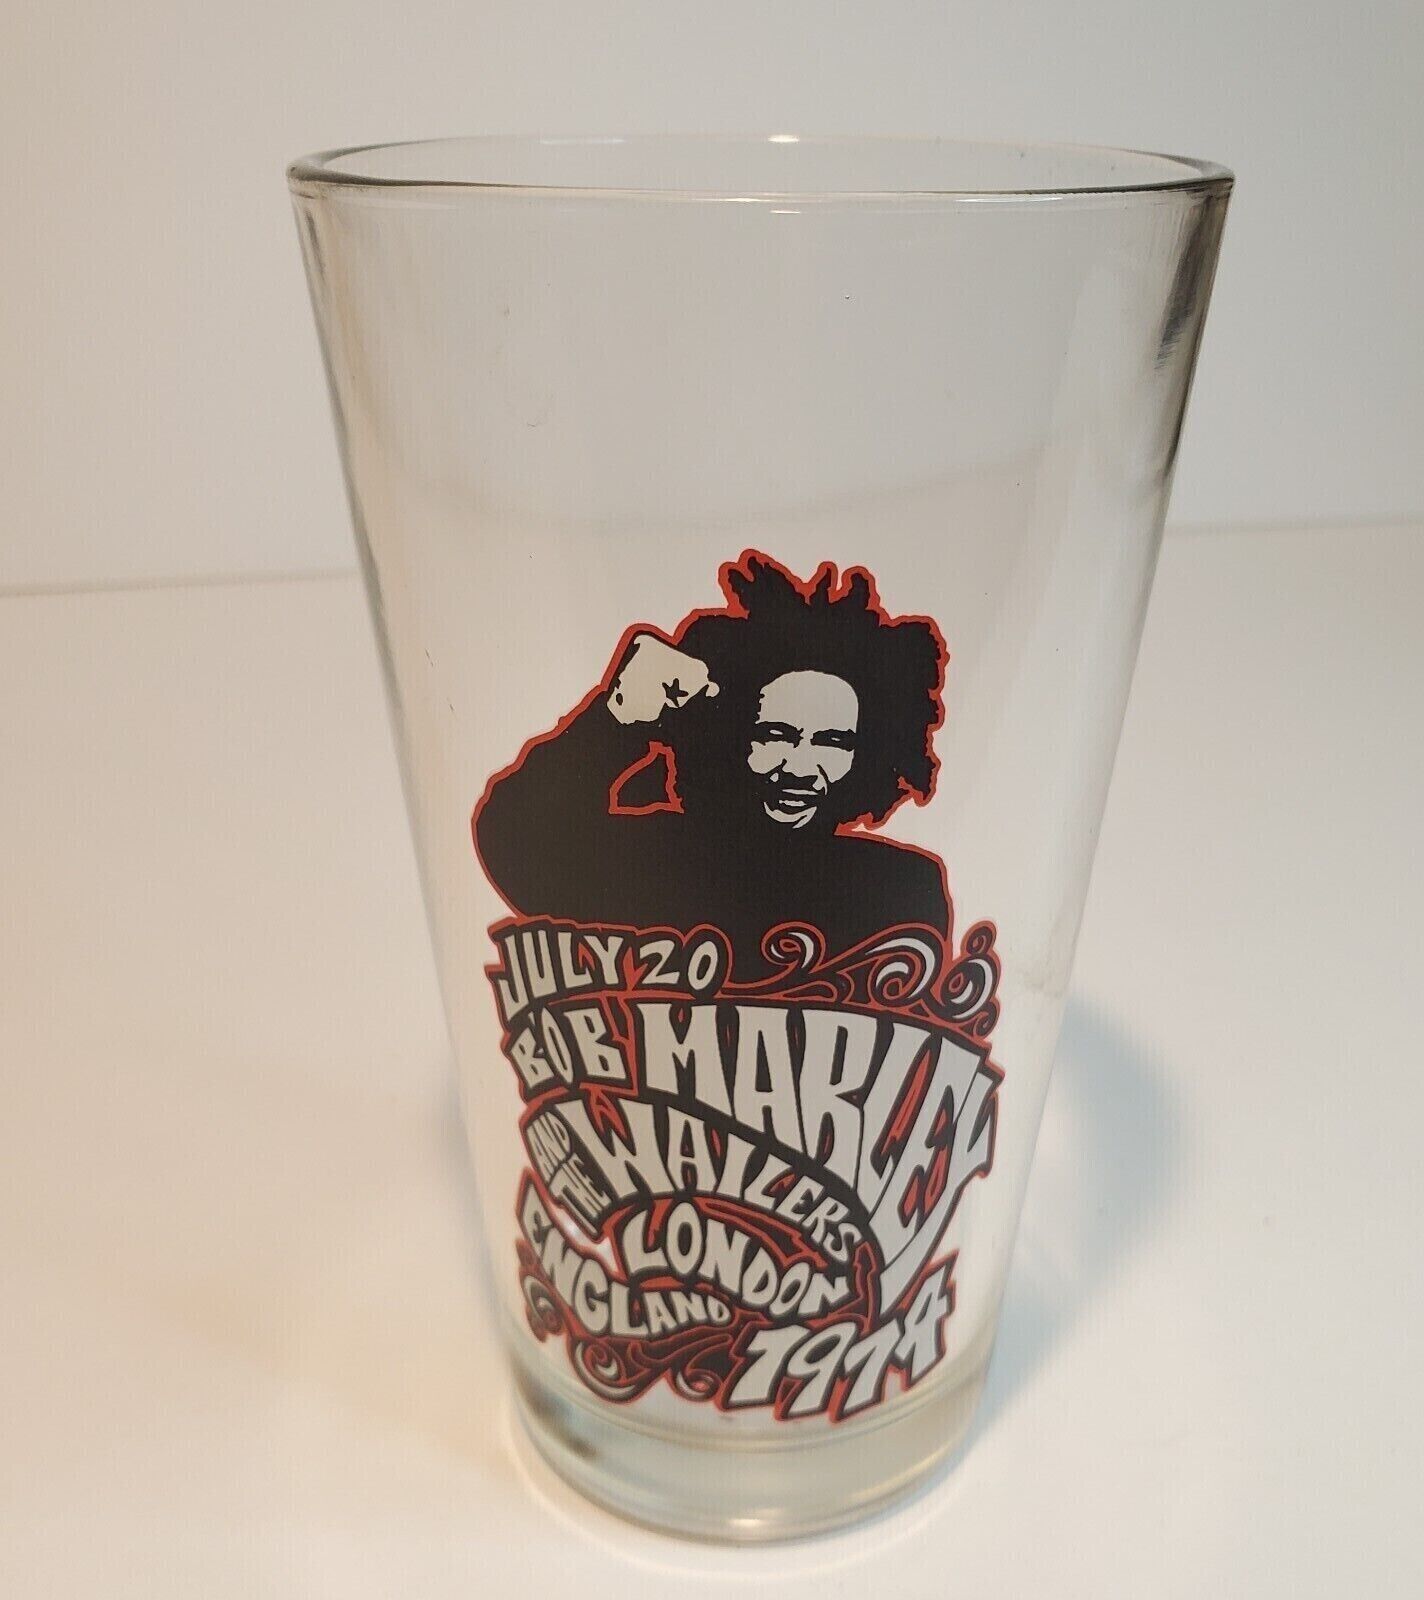 Vintage Bob Marley and The Wailers \'London, England july 20, 1974\' beer glass